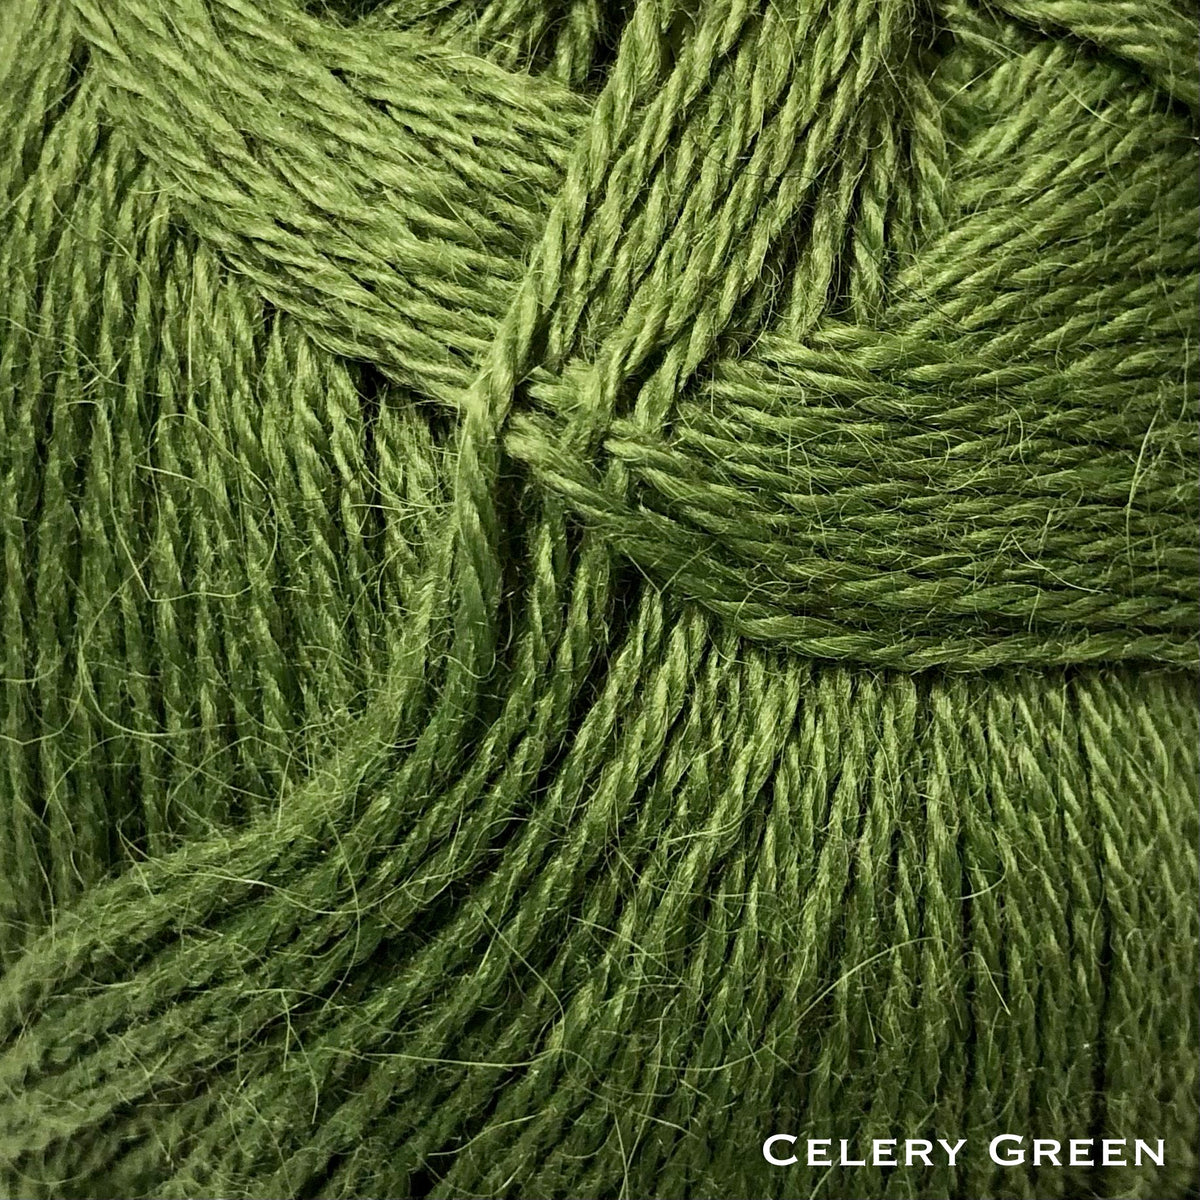 Olive Green Fingering Weight Alpaca Yarn For Sale